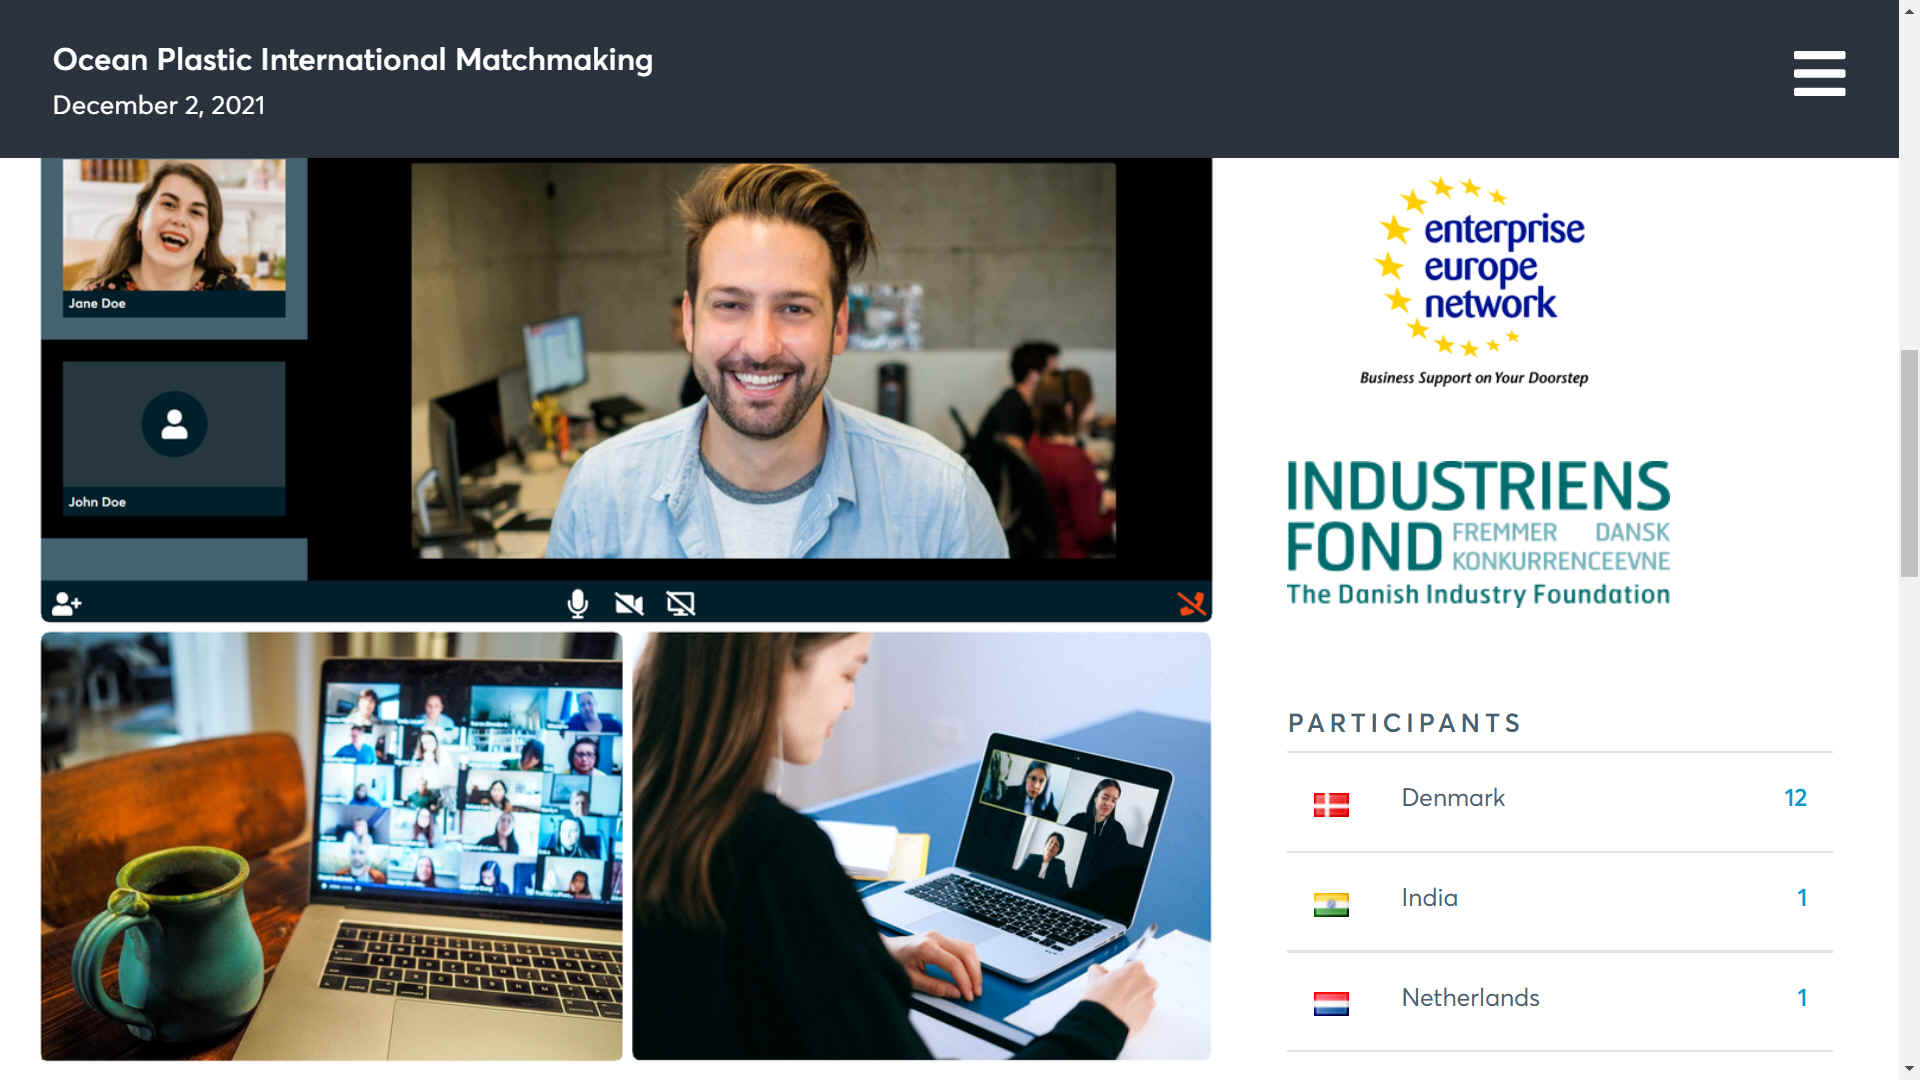 The Danish Industry Foundation, ocean plastic matchmaking event 2nd December 2021